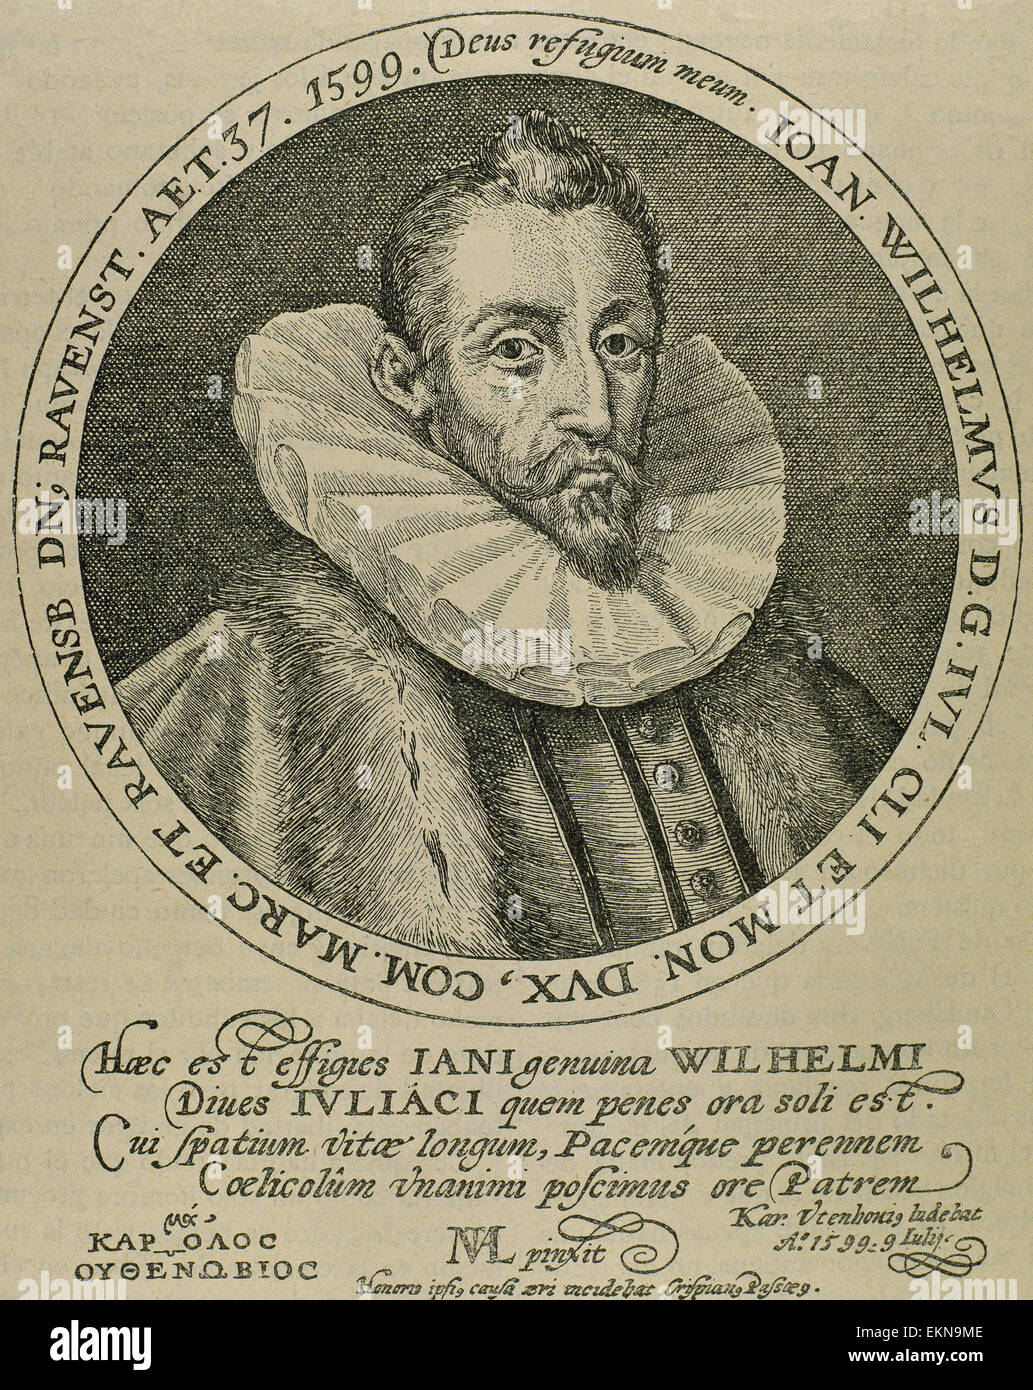 John William of Julich-Cleves-Berg (1562-1609). Duke of Julich-Cleves-Berg.  German noble and religious. Portrait. Engraving. Stock Photo